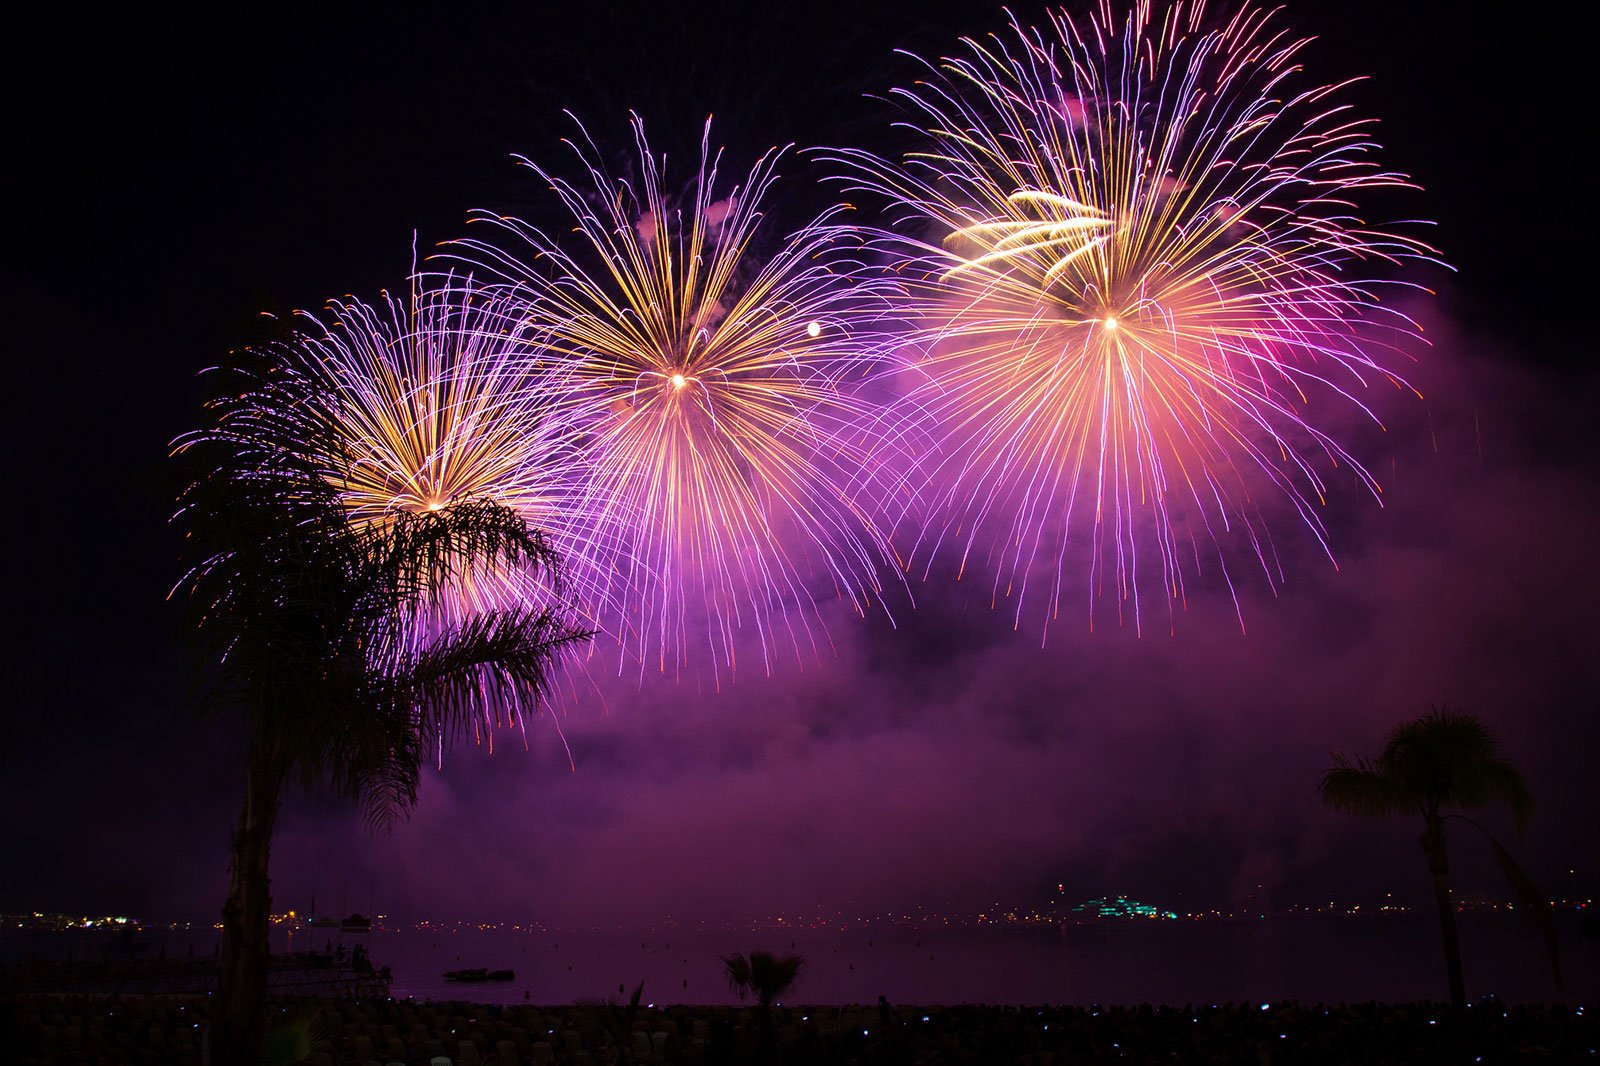 How to visit the fireworks festival in Cannes